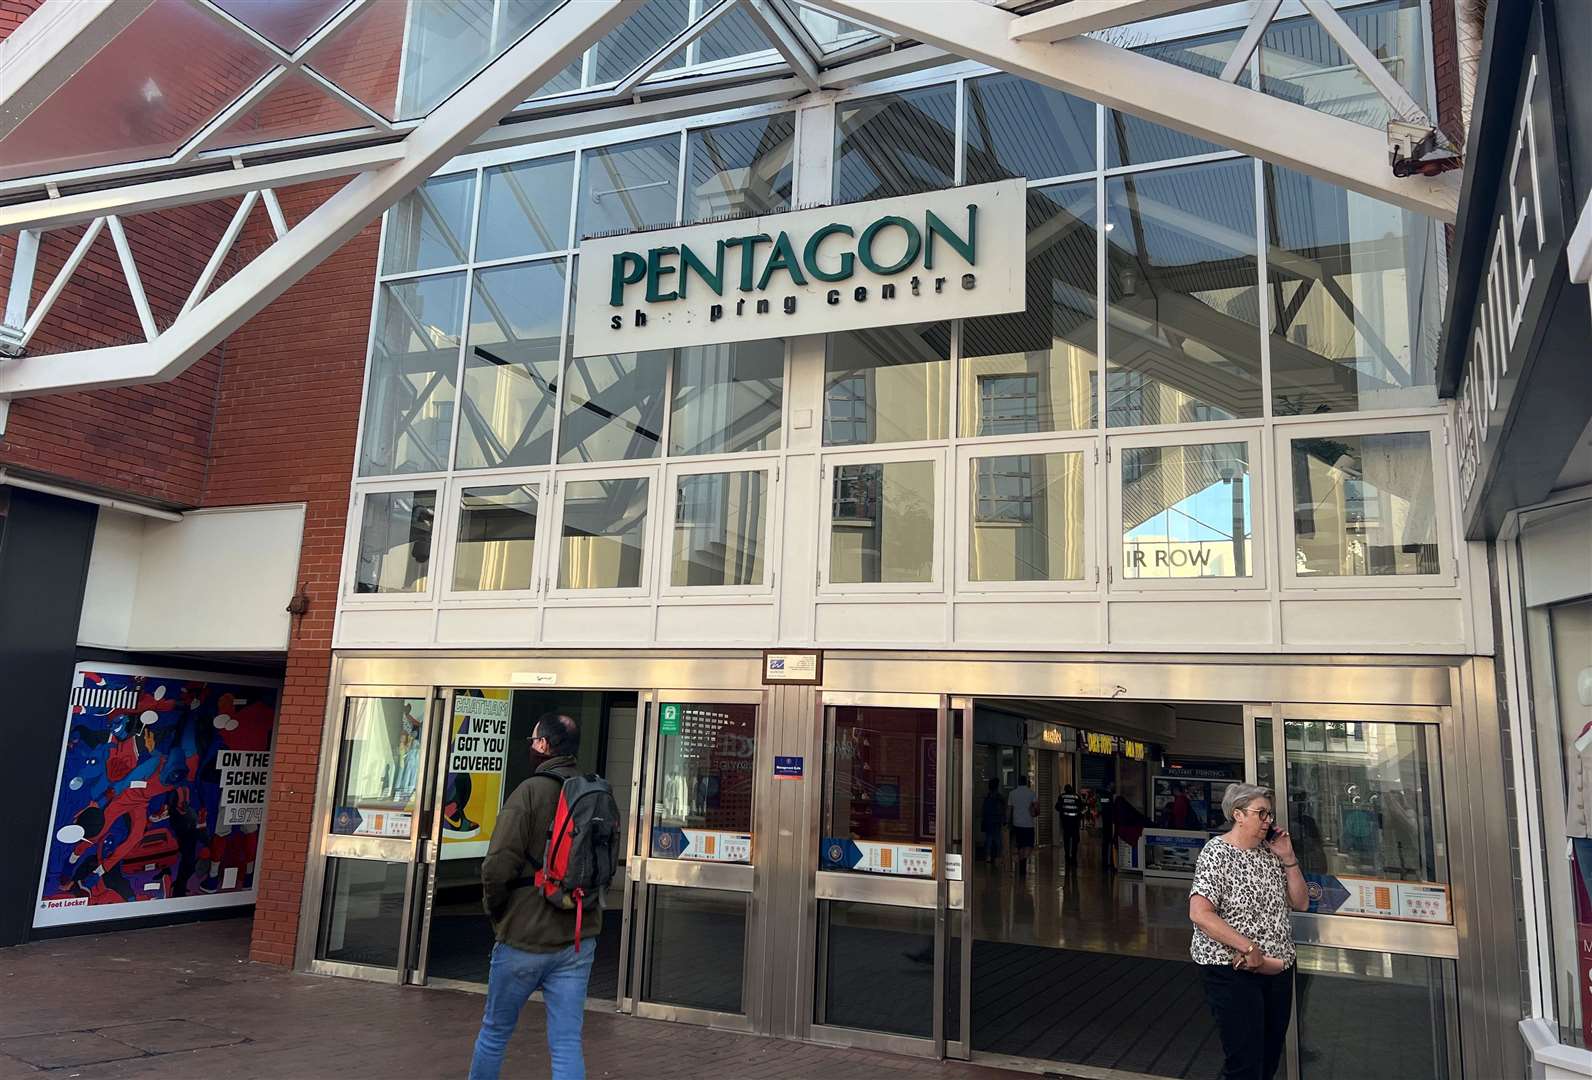 A young girl was raped at Pentagon Shopping Centre in Chatham